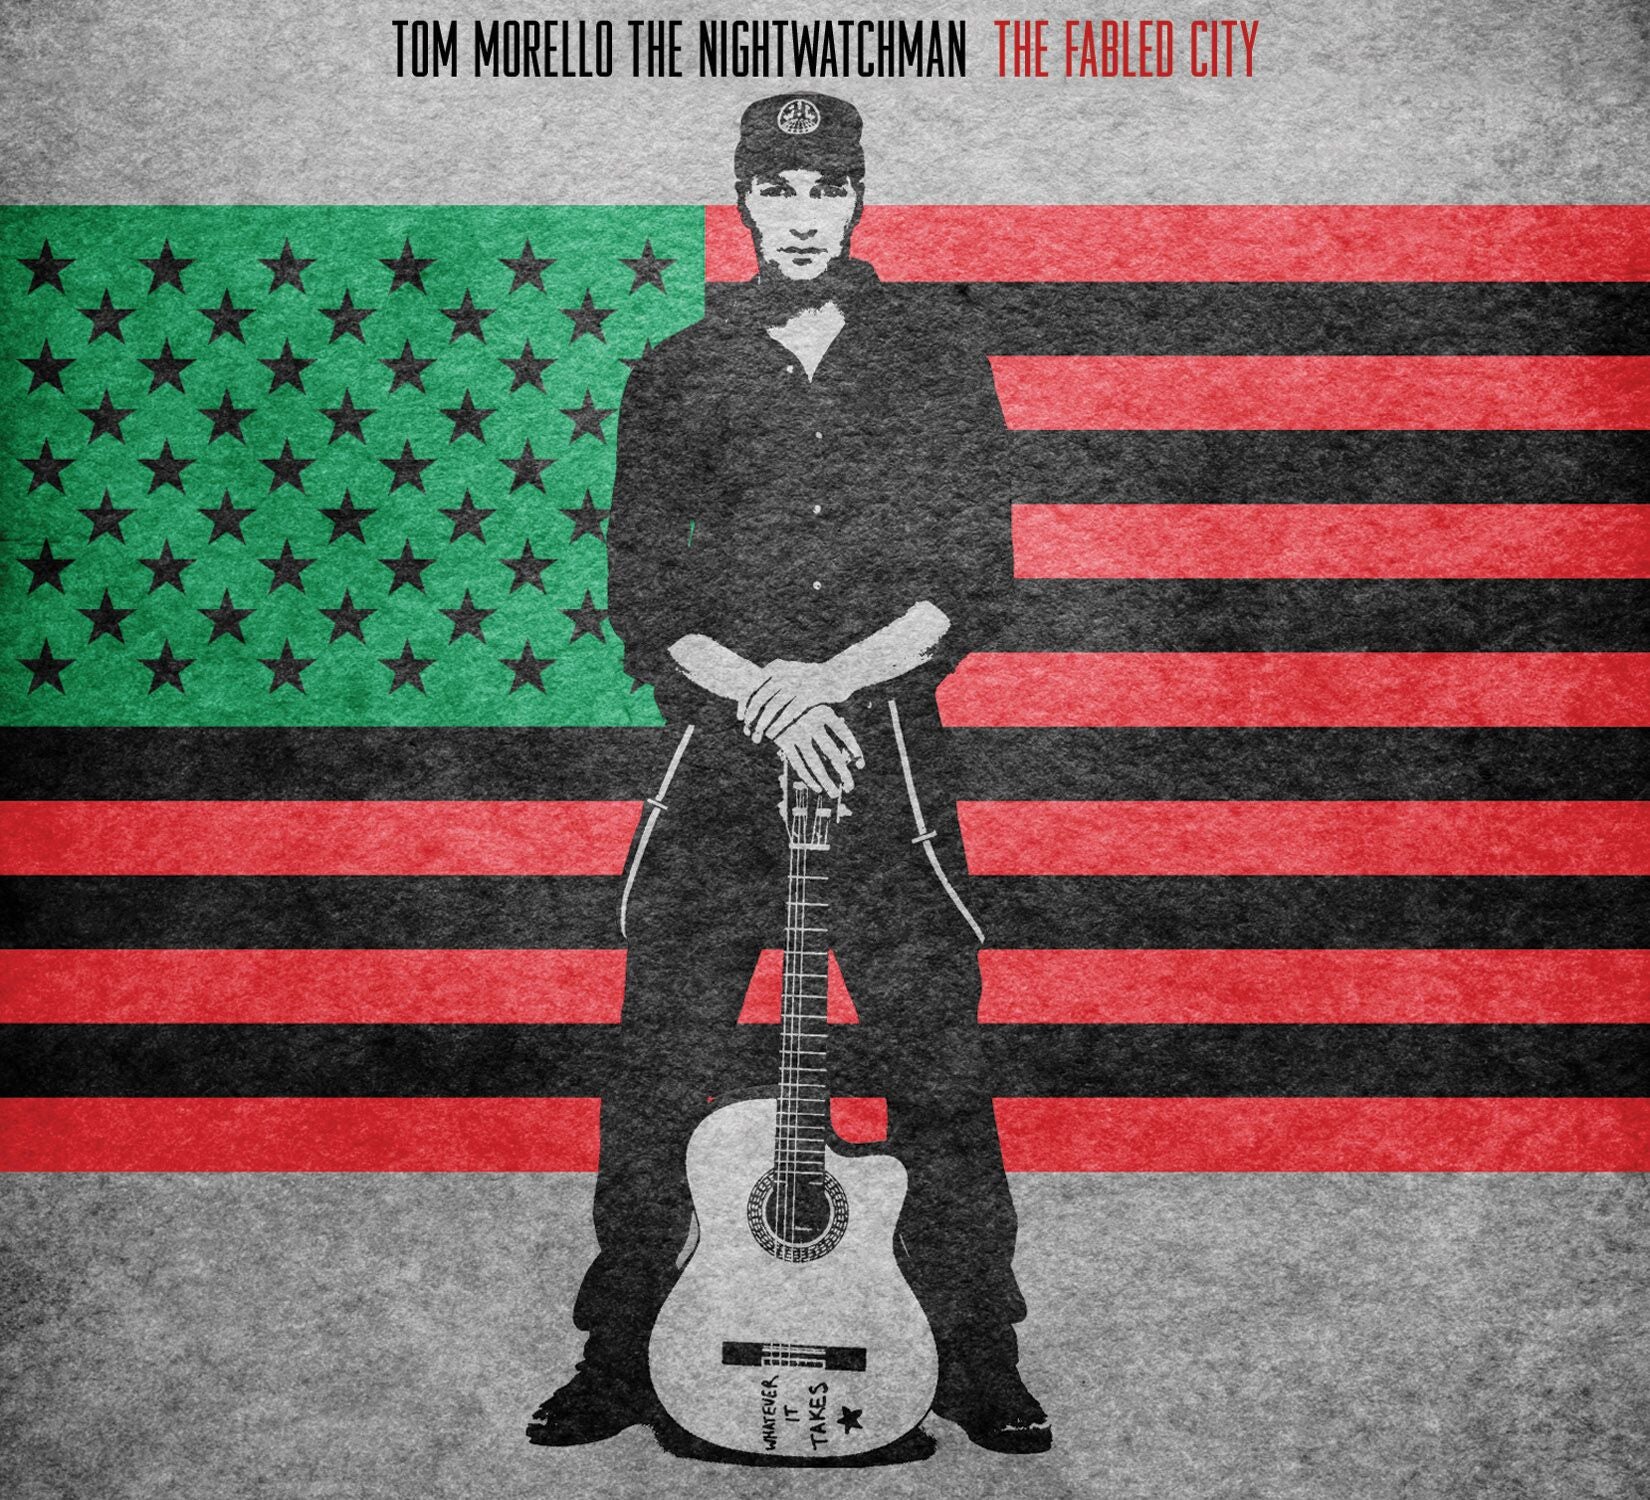 Tom Morello: The Nightwatchman - The Fabled City [CD]